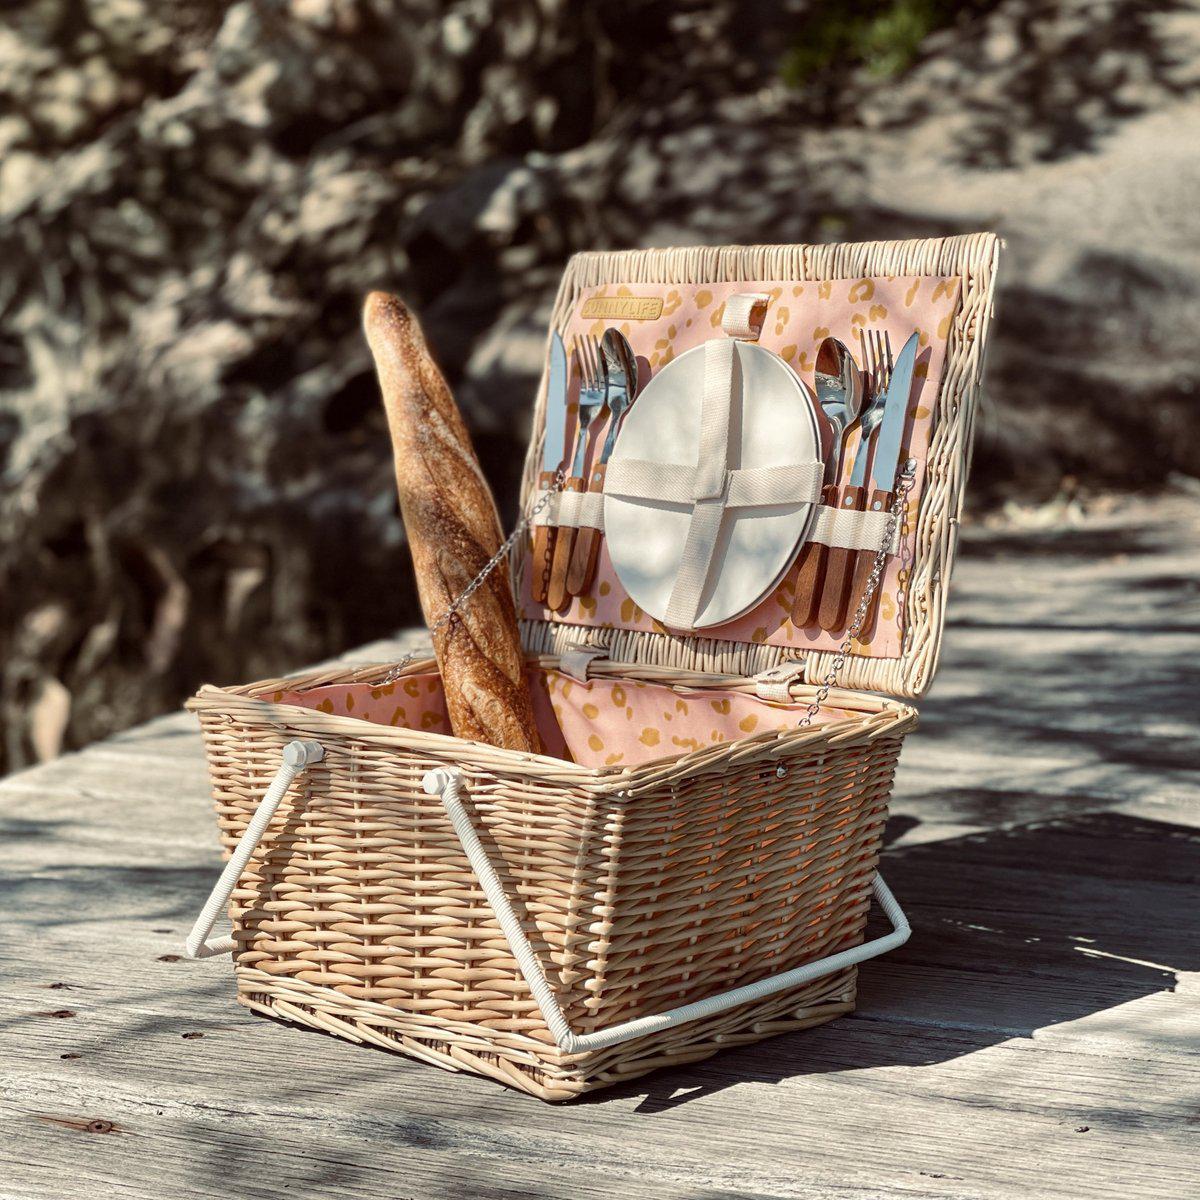 Small Picnic Basket - Call Of The Wild - Peachy Pink-Travel & Outdoors-Sunny Life-The Bay Room